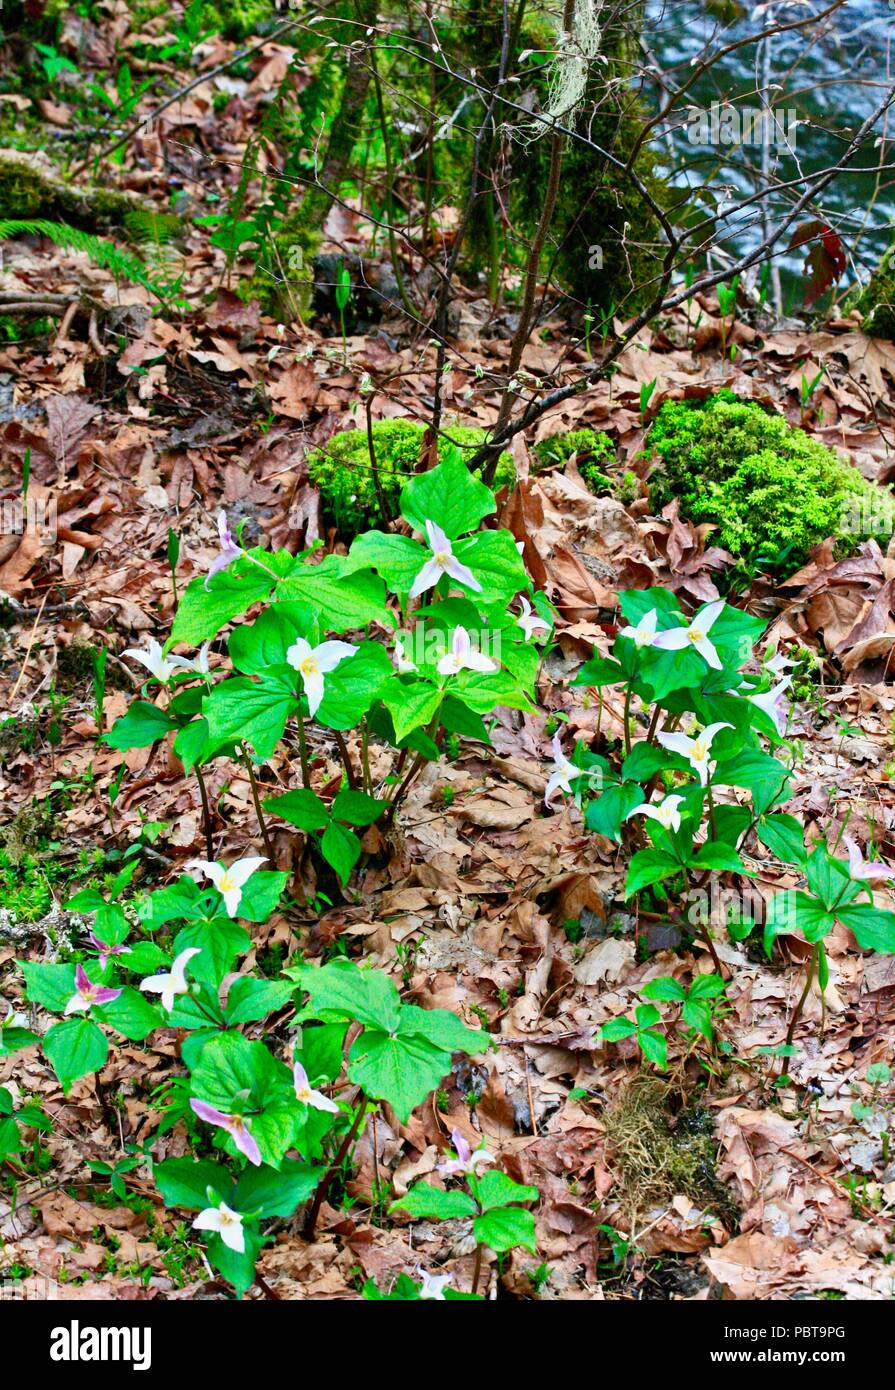 Trillium flower with ferns and dead leaves in forest setting Stock Photo